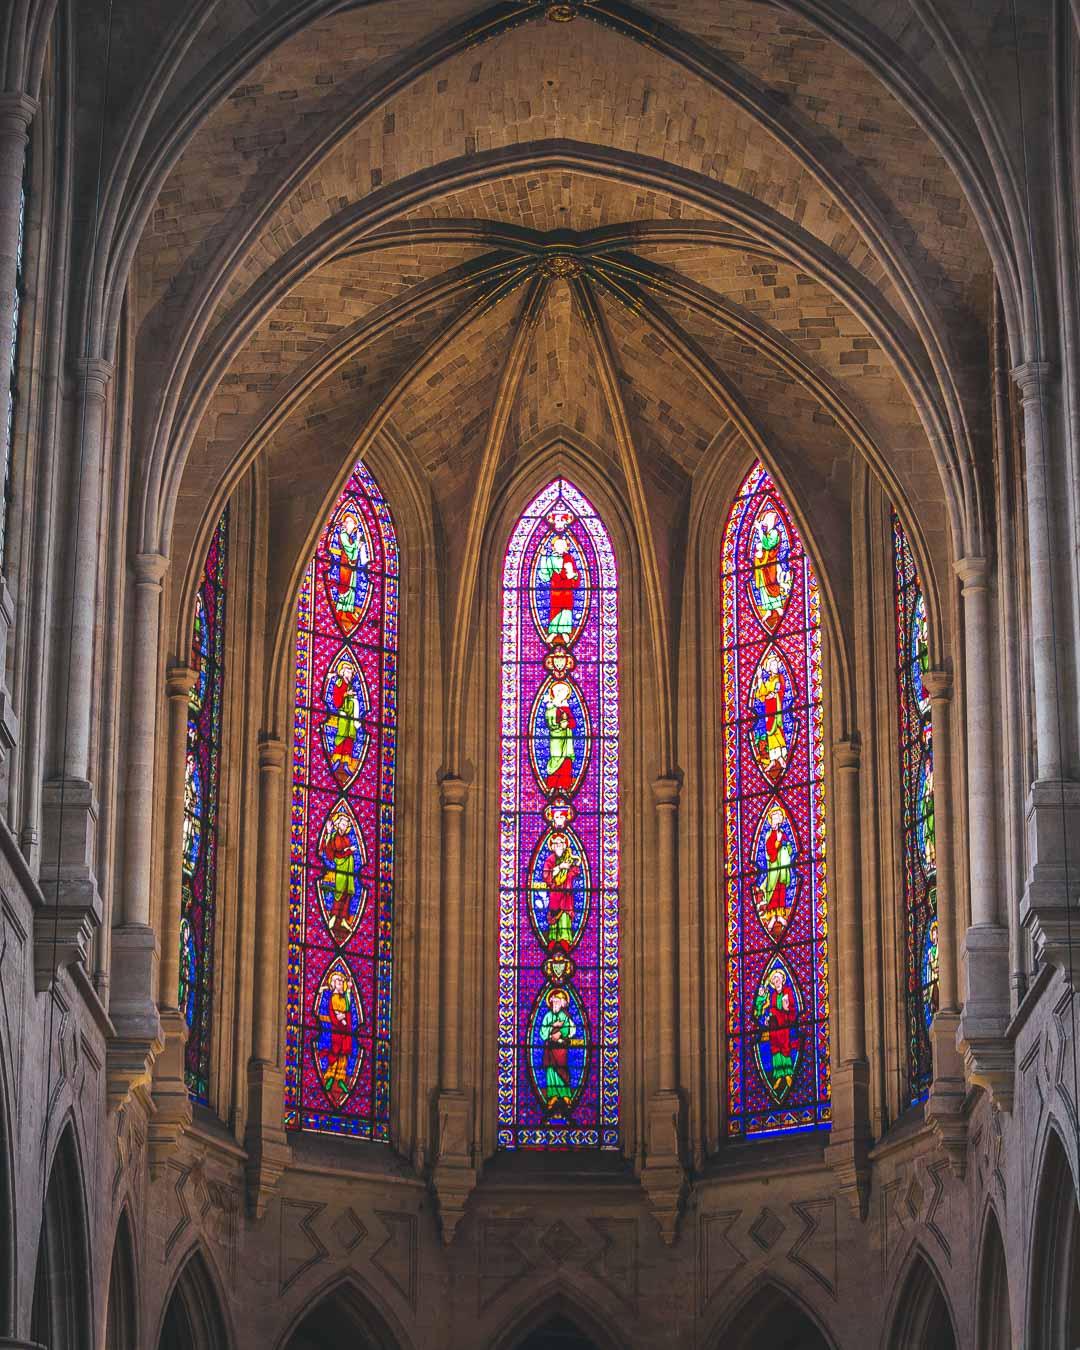 stained glass window above the nave in saint germain l'auxerrois